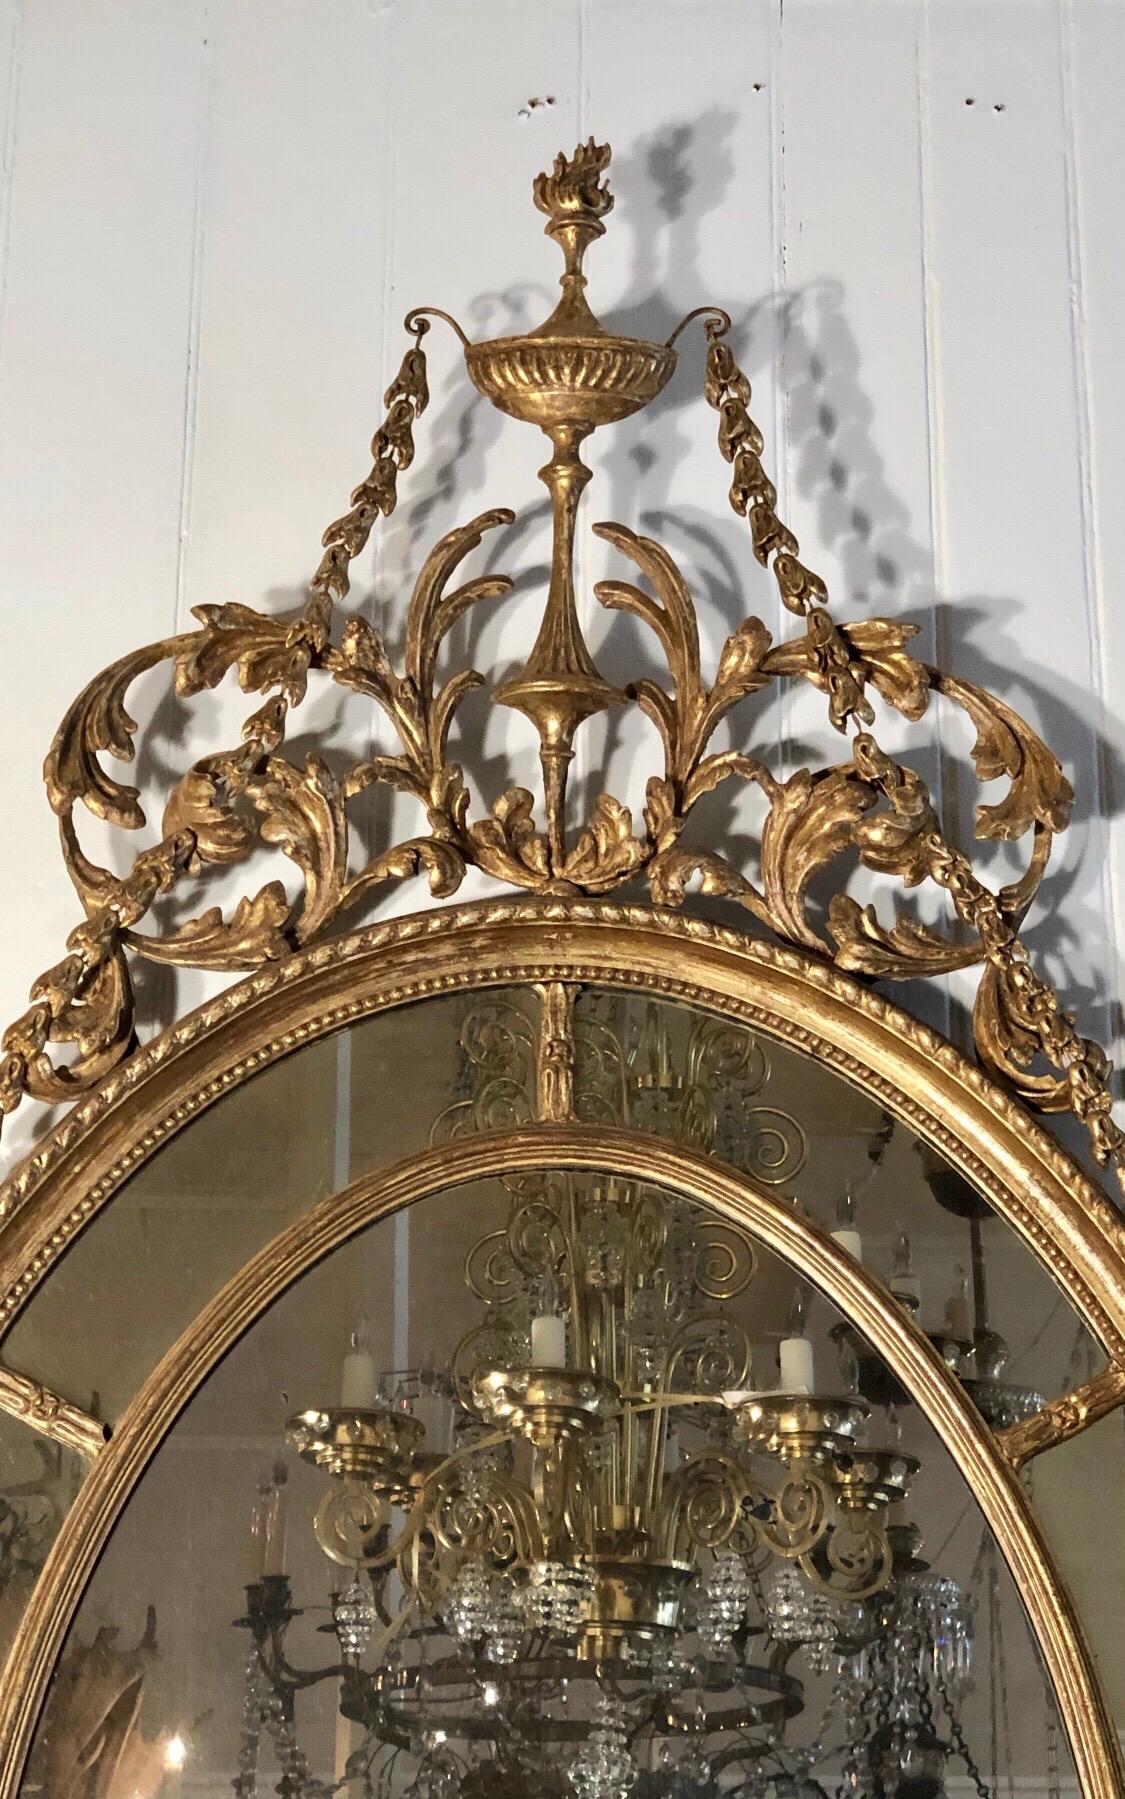 This elegant Adam mirror has a classical oval patera mirror border encompassing the looking glass. The crest has a central Adam urn with a burning flame flanked by scrolled leaves and branches coming up to a central reef below the urn. Chains of